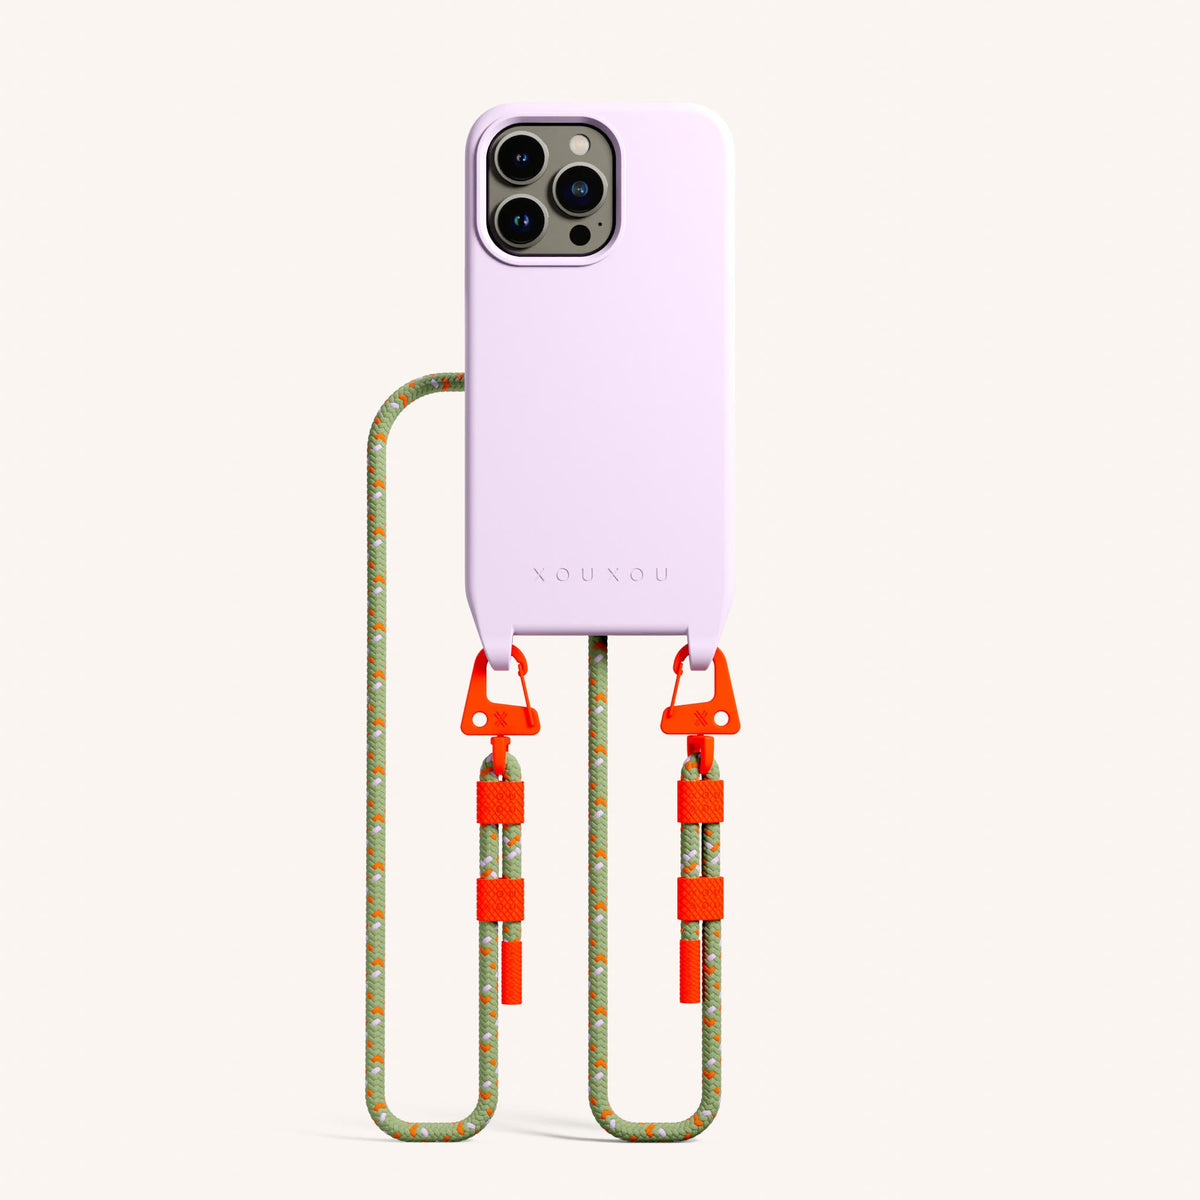 Phone Necklace with Carabiner Rope for iPhone 13 Pro with MagSafe in Lilac + Orange Camouflage Total View | XOUXOU #phone model_iphone 13 pro